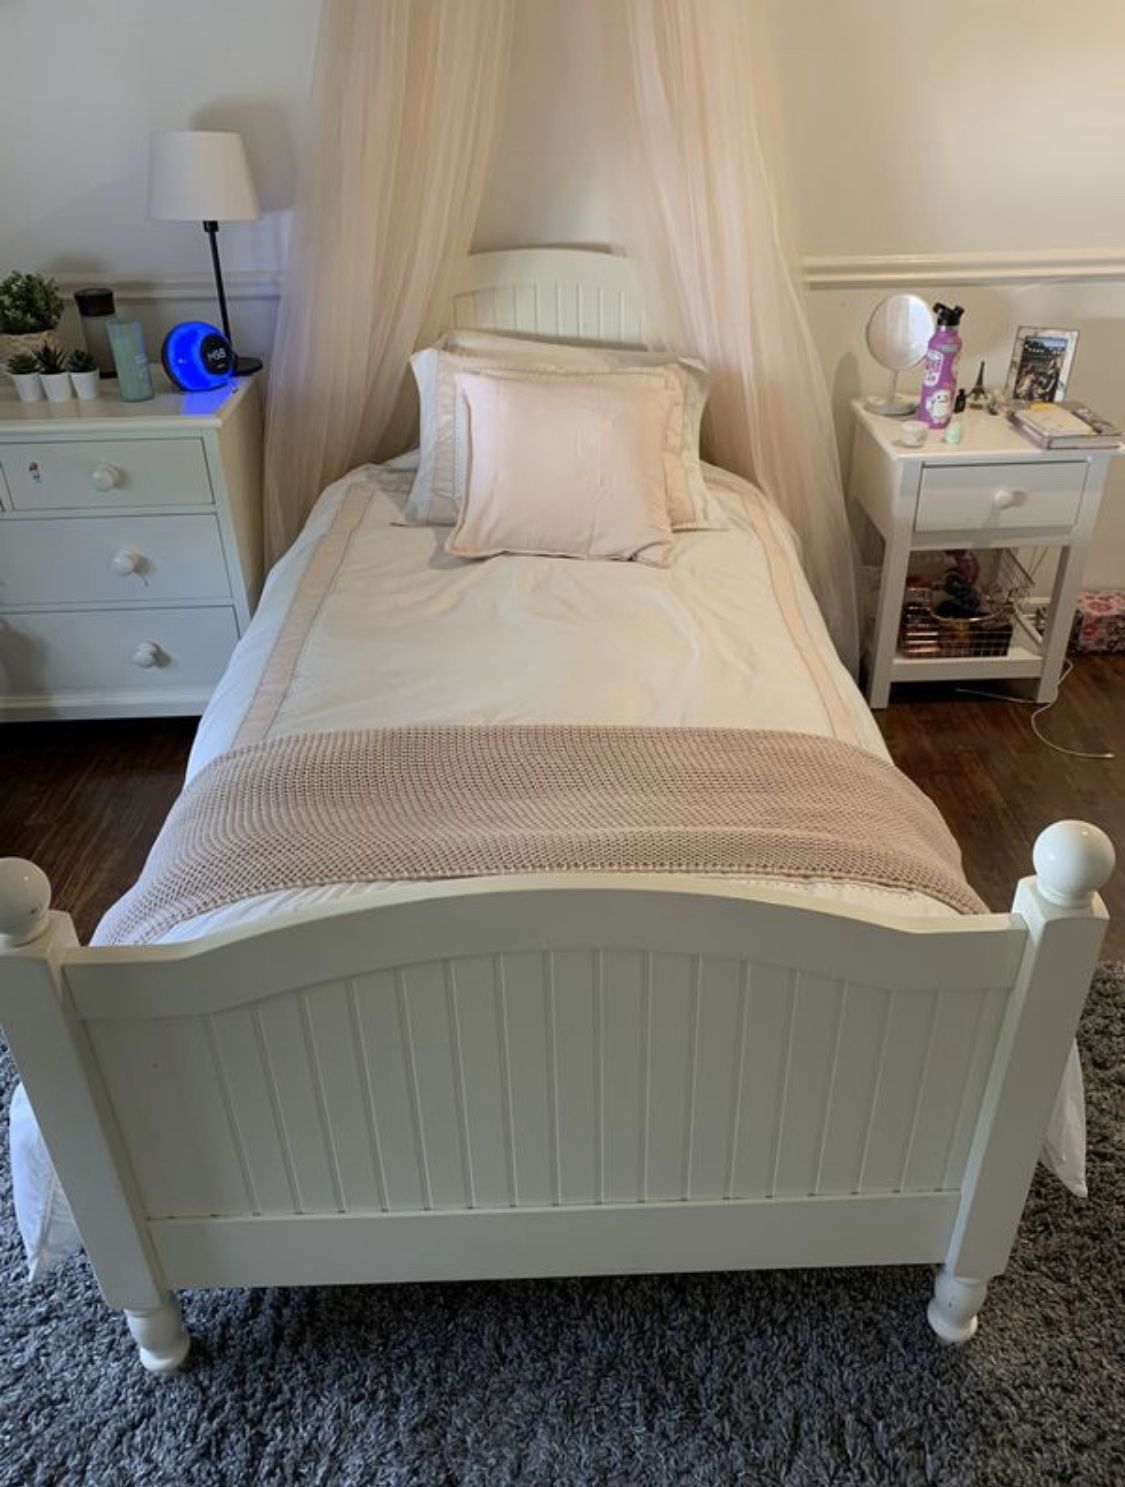 White twin bed, dresser, nightstand and mattress. Pottery barn.